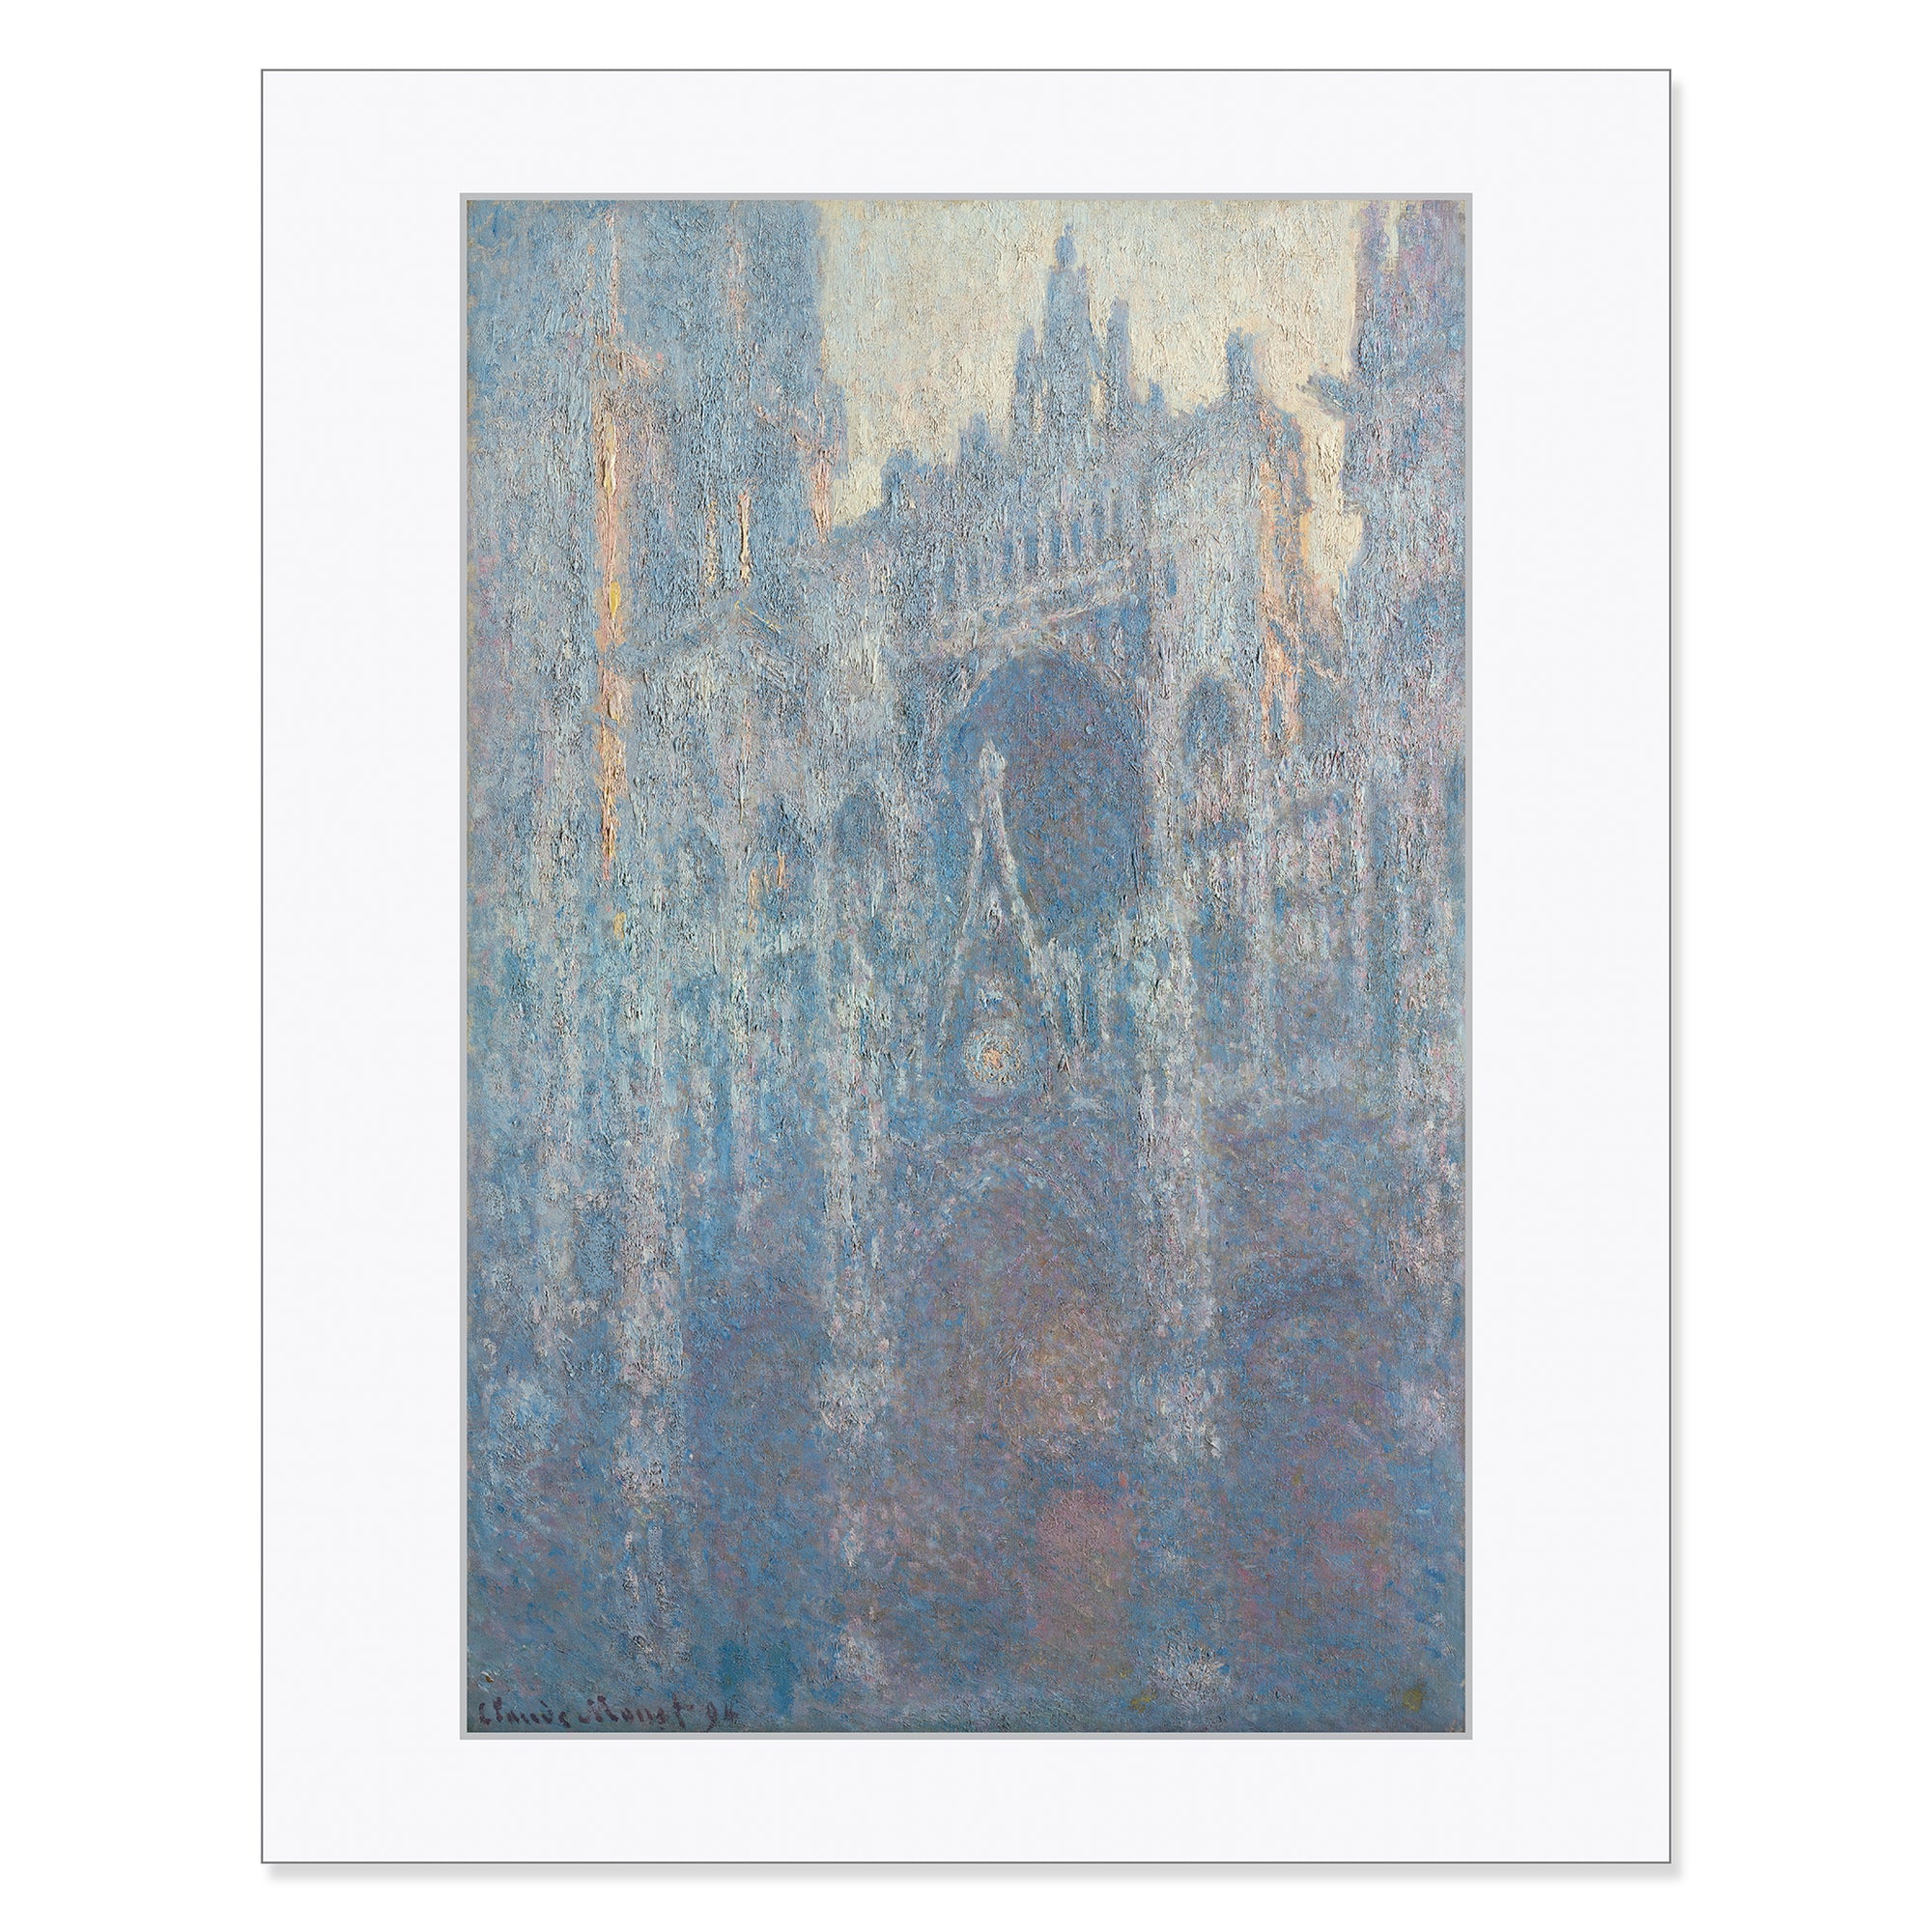 Monet-The Portal of Rouen Cathedral in Morning Light-11"x14" Matted Print | Getty Store